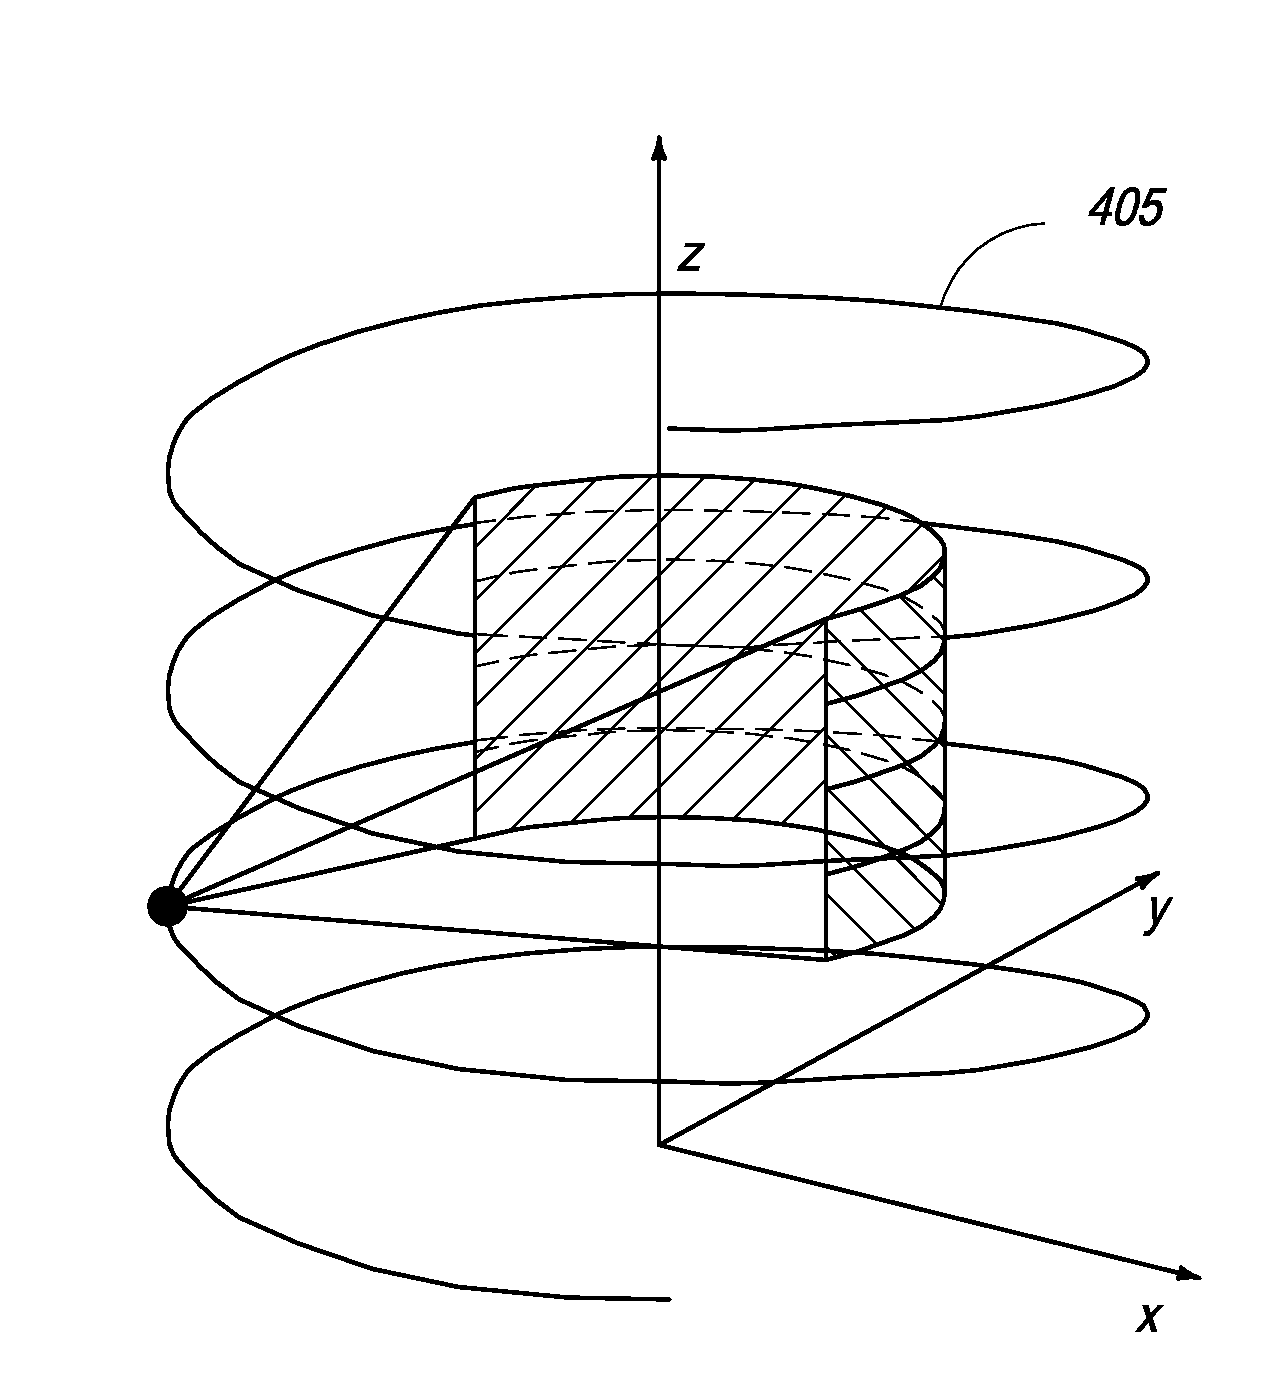 System and Method for Image Reconstruction by Using Multi-Sheet Surface Rebinning